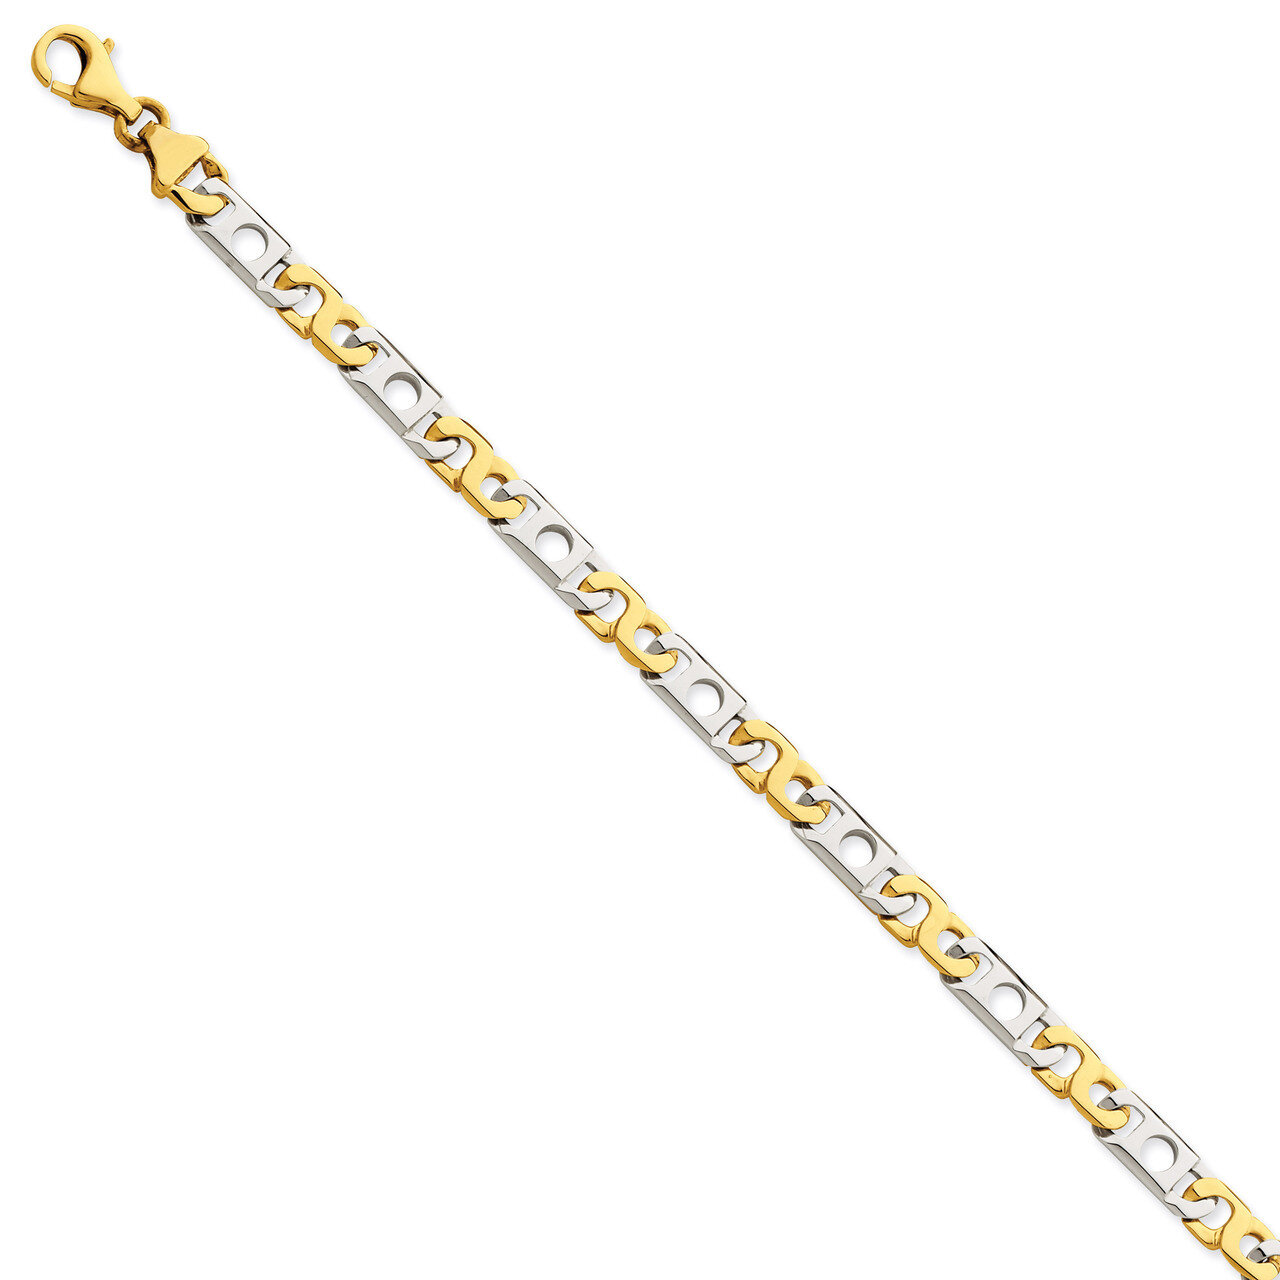 6mm Hand-polished Fancy Link Chain 8 Inch 14k Two-Tone Gold LK225-8